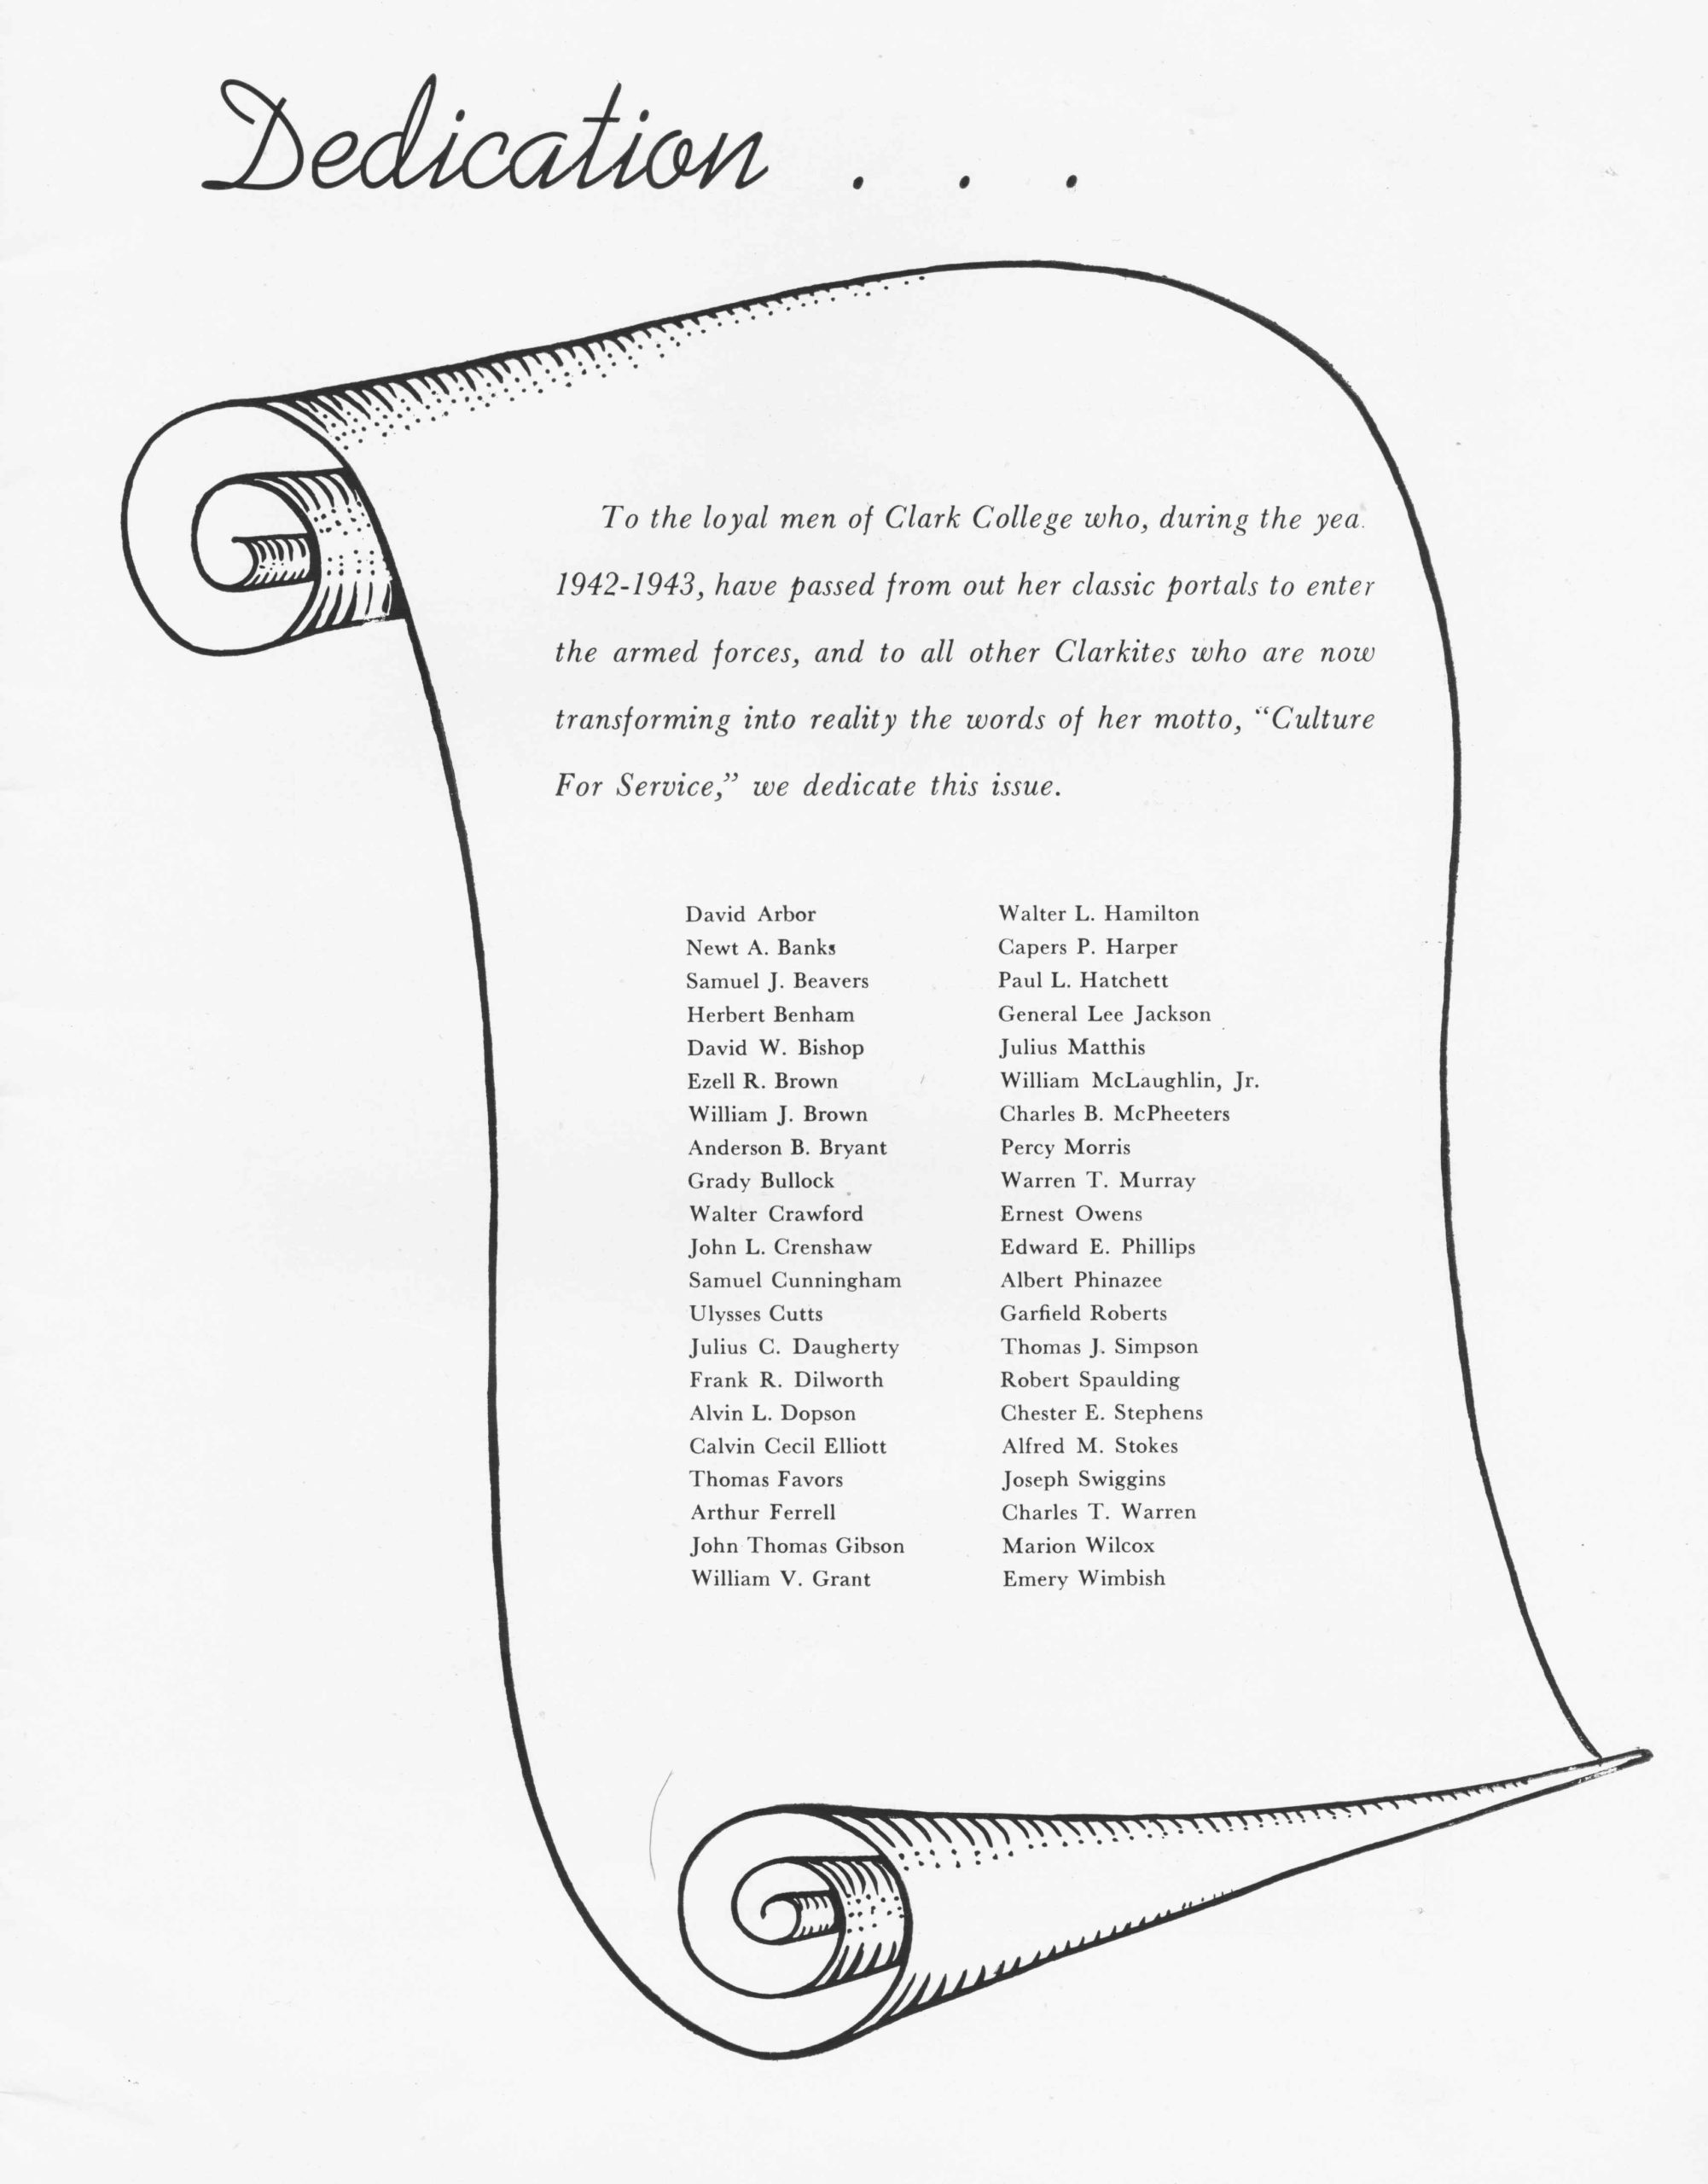 The Mentor, Clark College1943Clark College printed and published materials